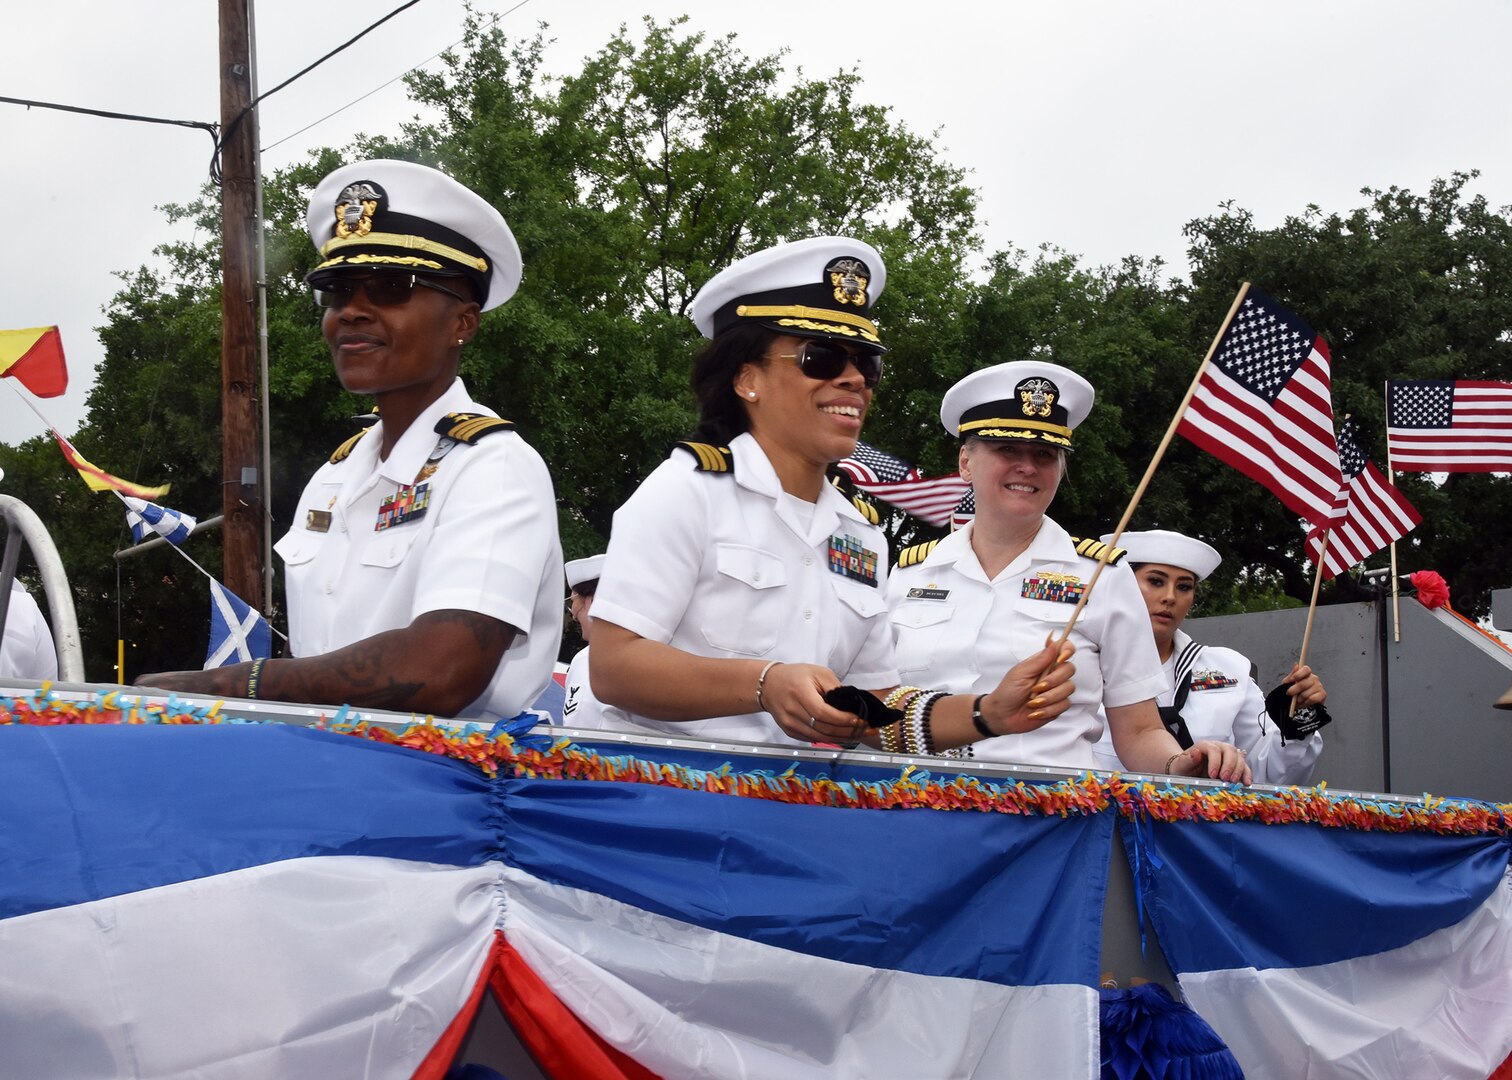 SAN ANTONIO - (April 26, 2024) – Left to right:  Cmdr. Stacey O’Neal, commanding officer, Navy Talent Acquisition Group (NTAG) San Antonio; Cmdr. Nneoma Lewis (Nurse Corps), Non-medical medical case manager, Navy Wounded Warrior (NWW) Program, Navy Region Southeast; and Capt. Jennifer Buechel (Nurse Corps), commanding officer, Naval Medical Research Unit (NAMRU) San Antonio, participated in the Battle of Flowers Parade held during Fiesta San Antonio. The Battle of Flowers Parade is the oldest event and largest parade of Fiesta San Antonio attracting crowds of more than 350,000. Leading the Sailors in the parade was Rear Adm. Walter Brafford, commander, Naval Medical Forces Support Command (NMFSC). Joint Base San Antonio is proud to be part of the diverse and vibrant community of San Antonio also known as Military City USA. (U.S. Navy Photo by Burrell Parmer, Naval Medical Research Unit San Antonio Public Affairs/Released)